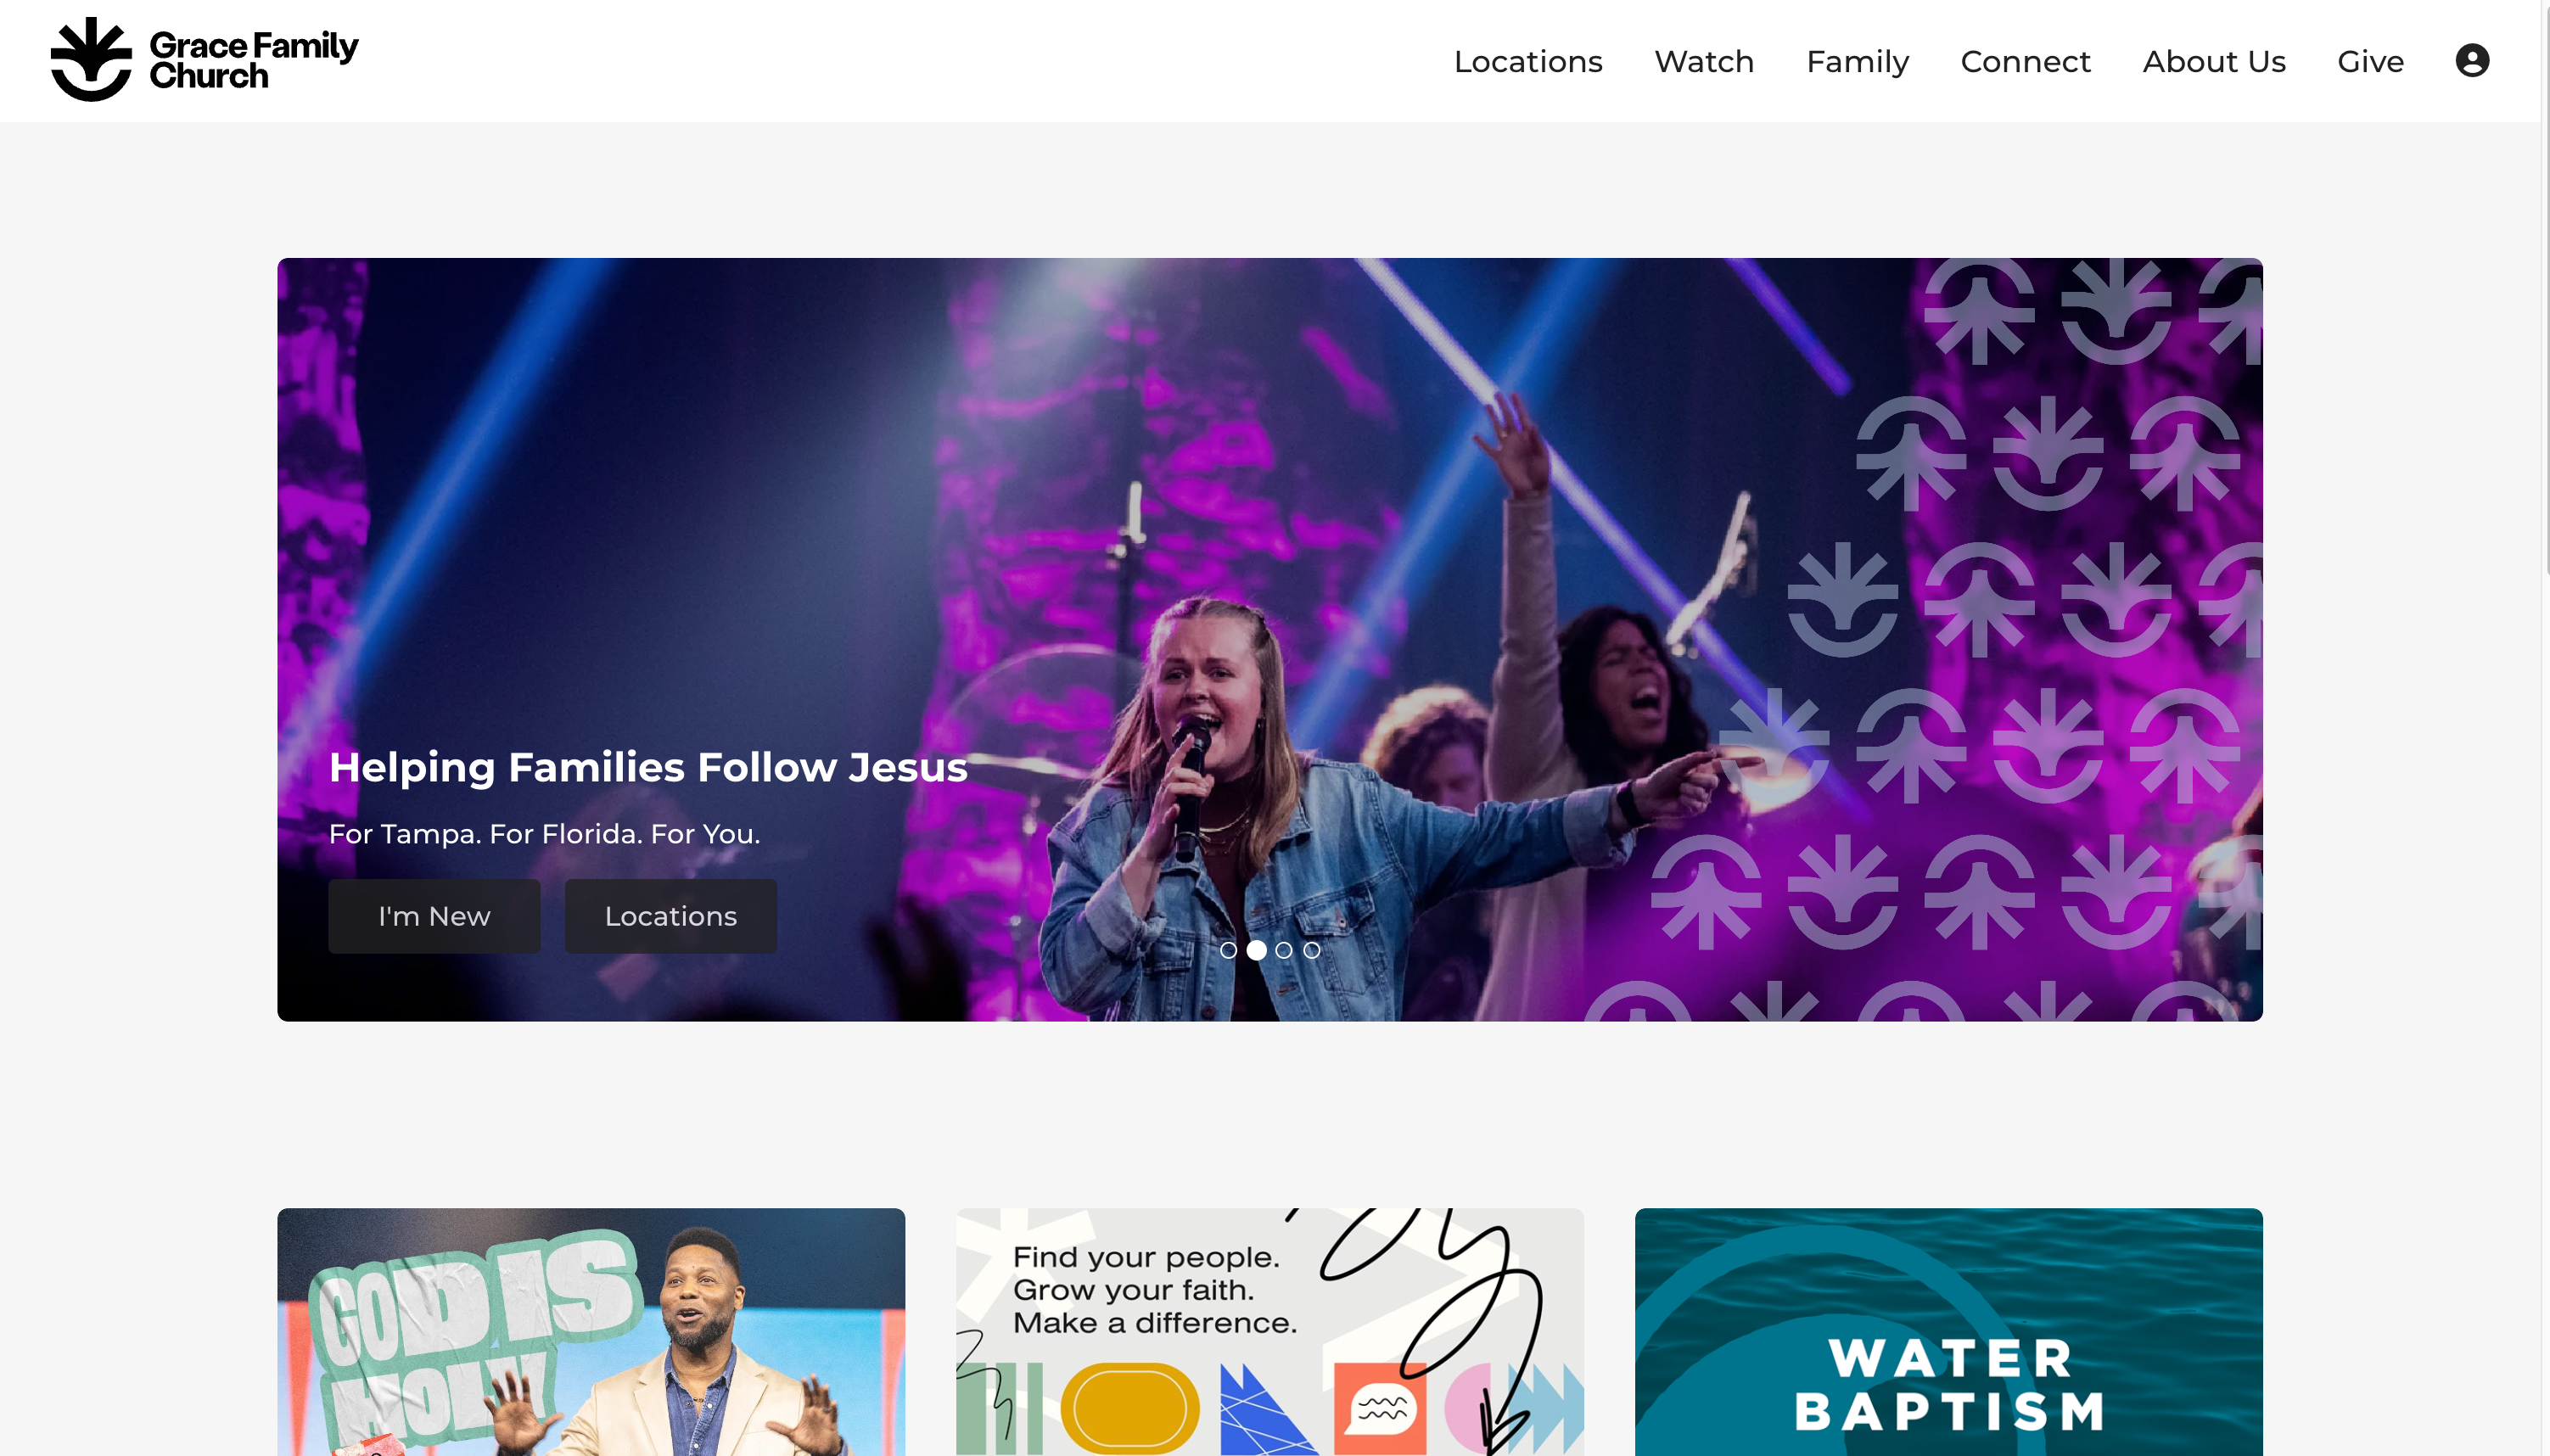 Website image from Grace Family Church located in Tampa, FL.